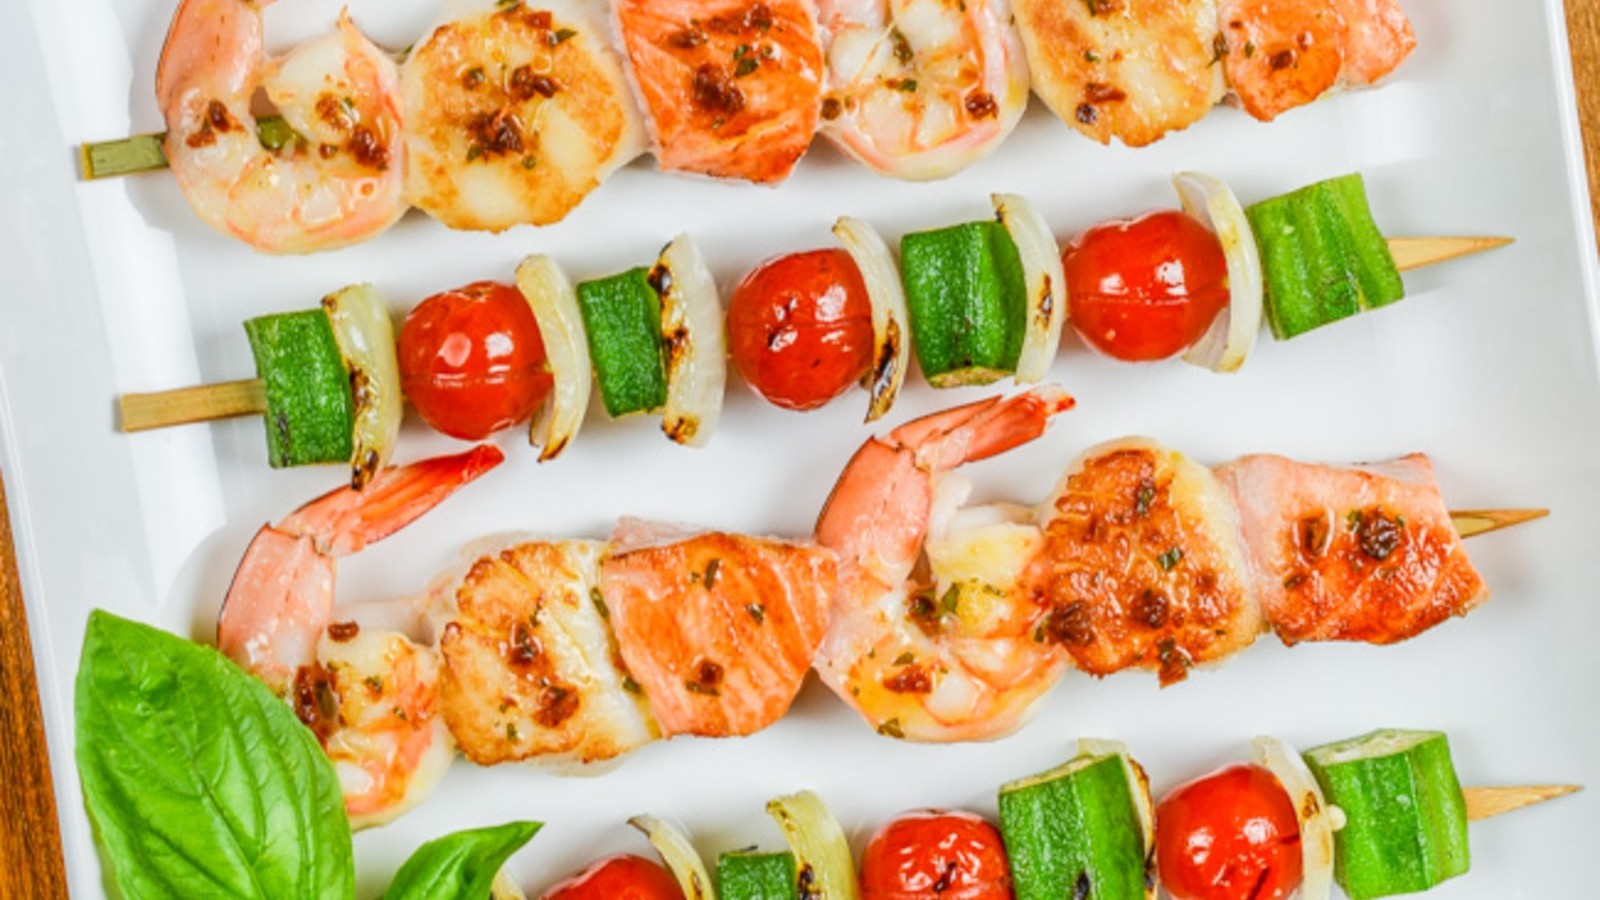 Image of Grilled Seafood Skewers with Tomato Basil Butter